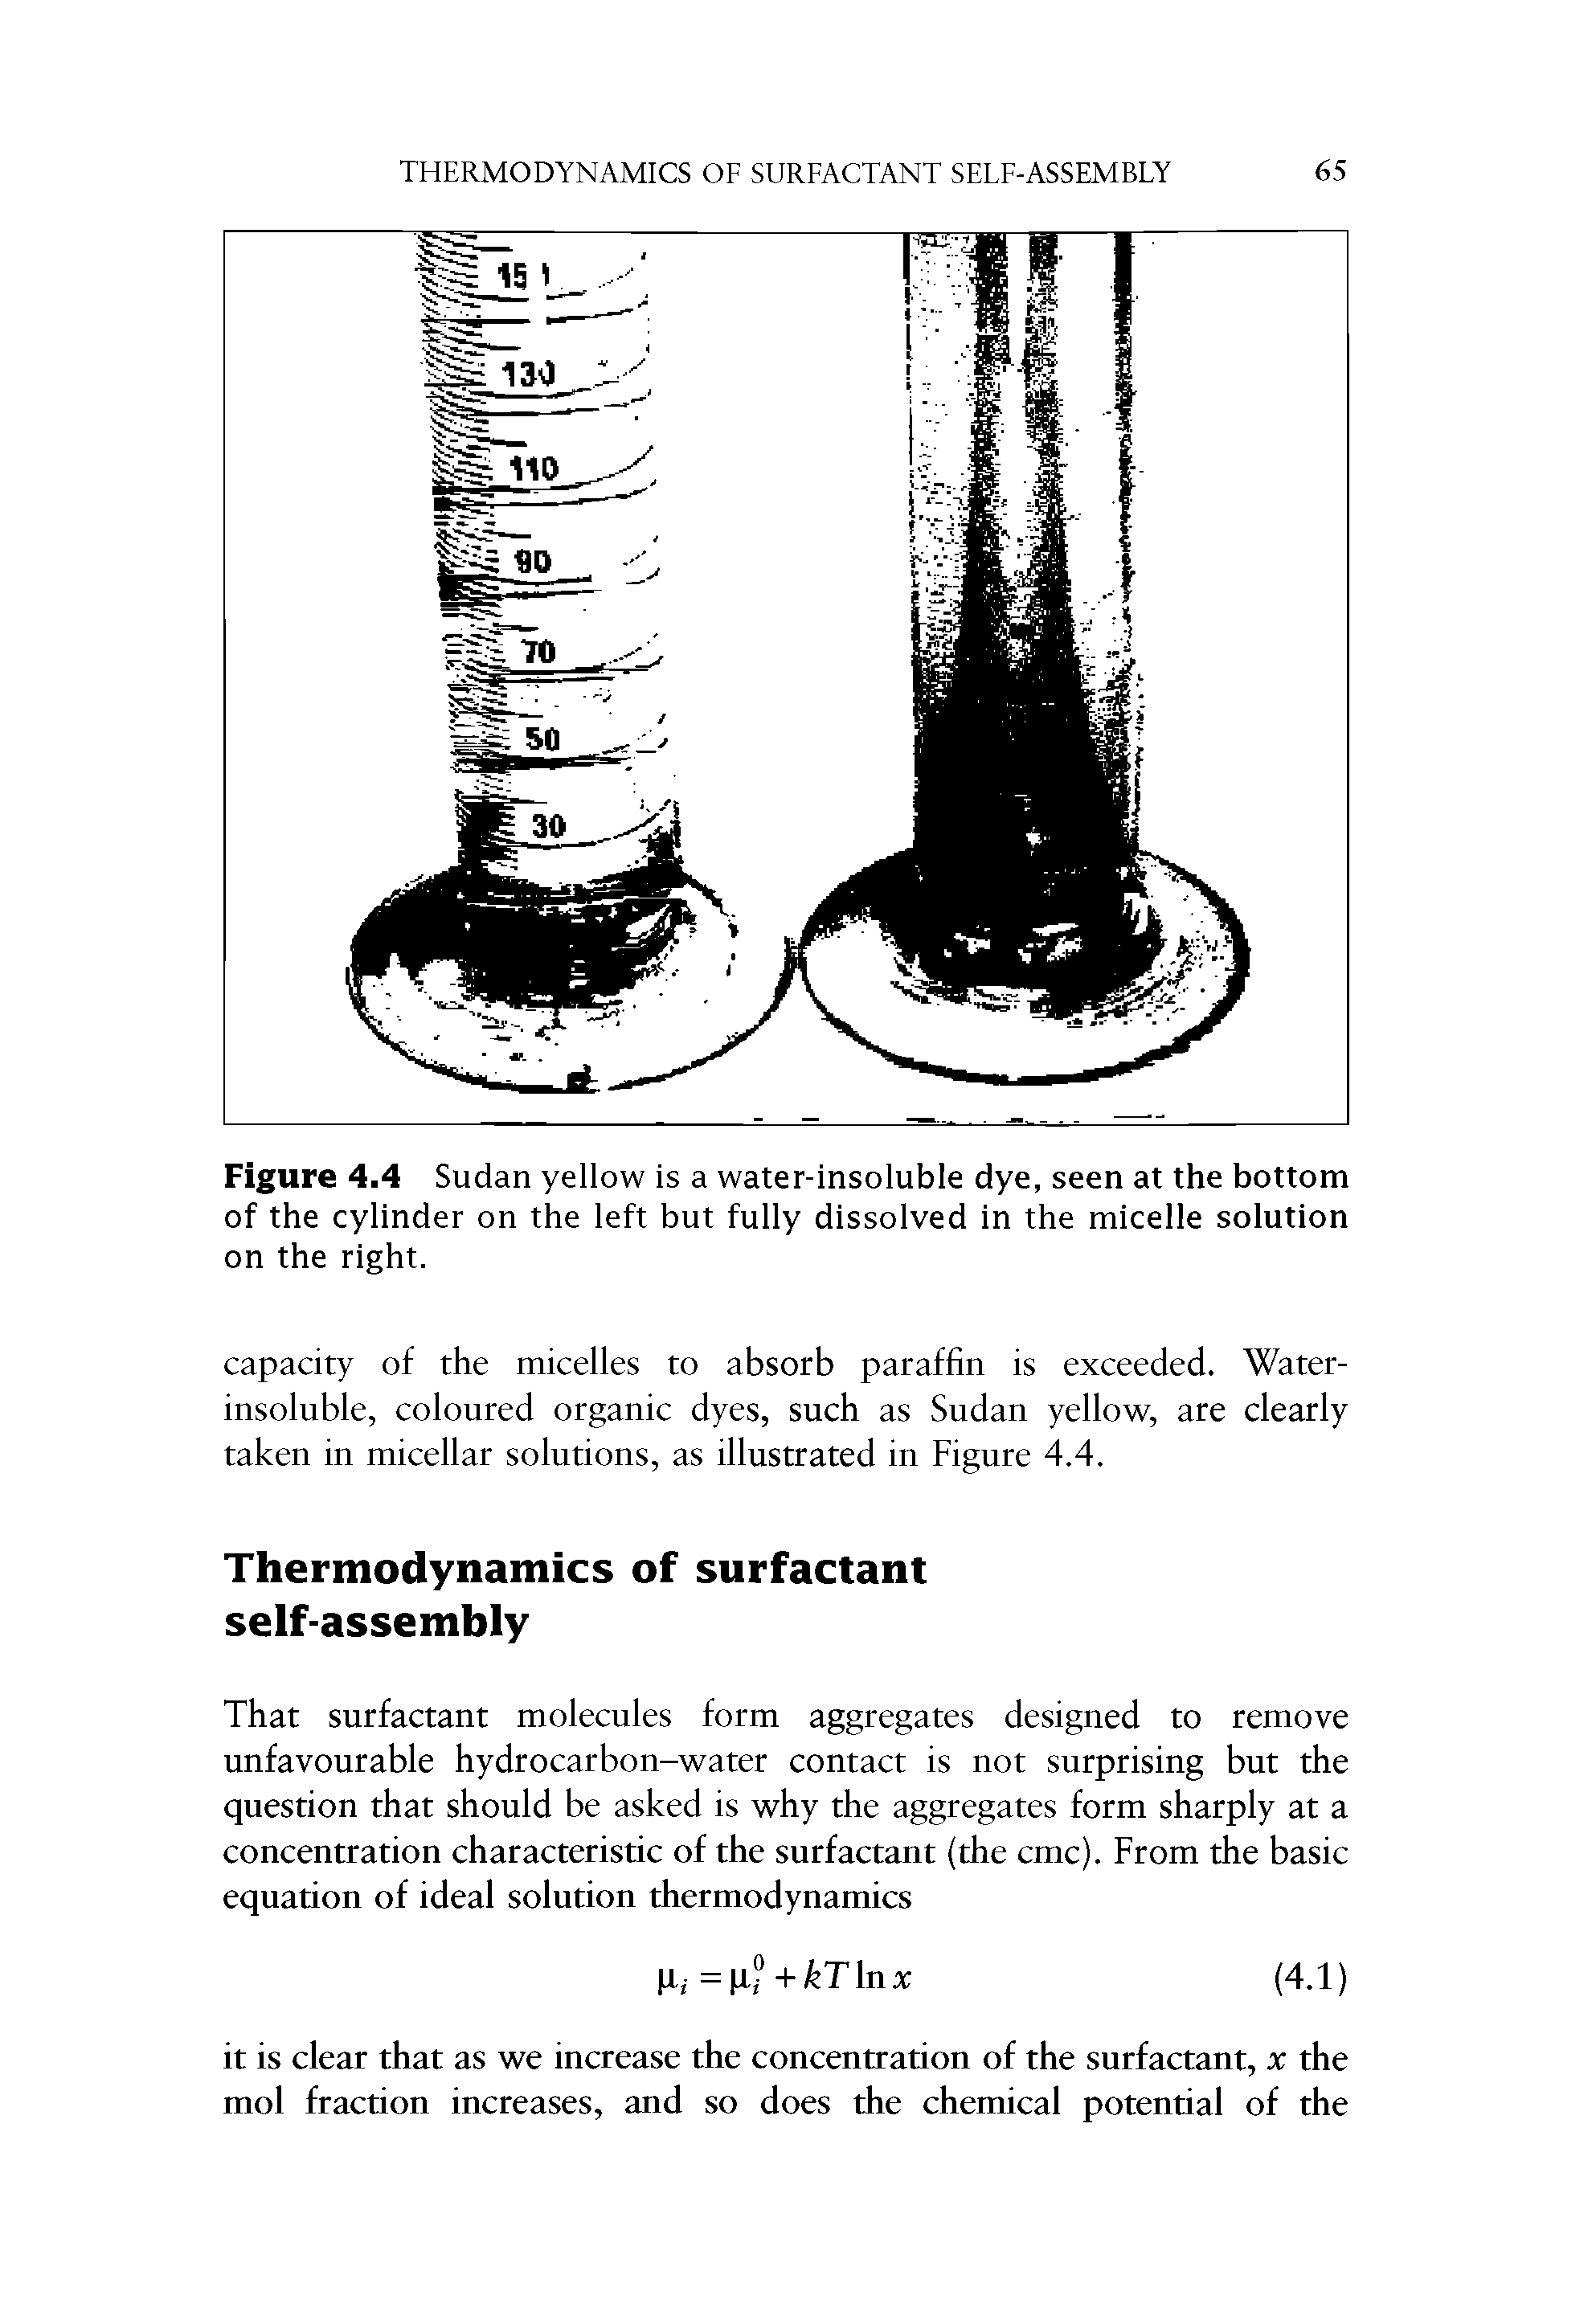 Figure 4.4 Sudan yellow is a water-insoluble dye, seen at the bottom of the cylinder on the left but fully dissolved in the micelle solution on the right.